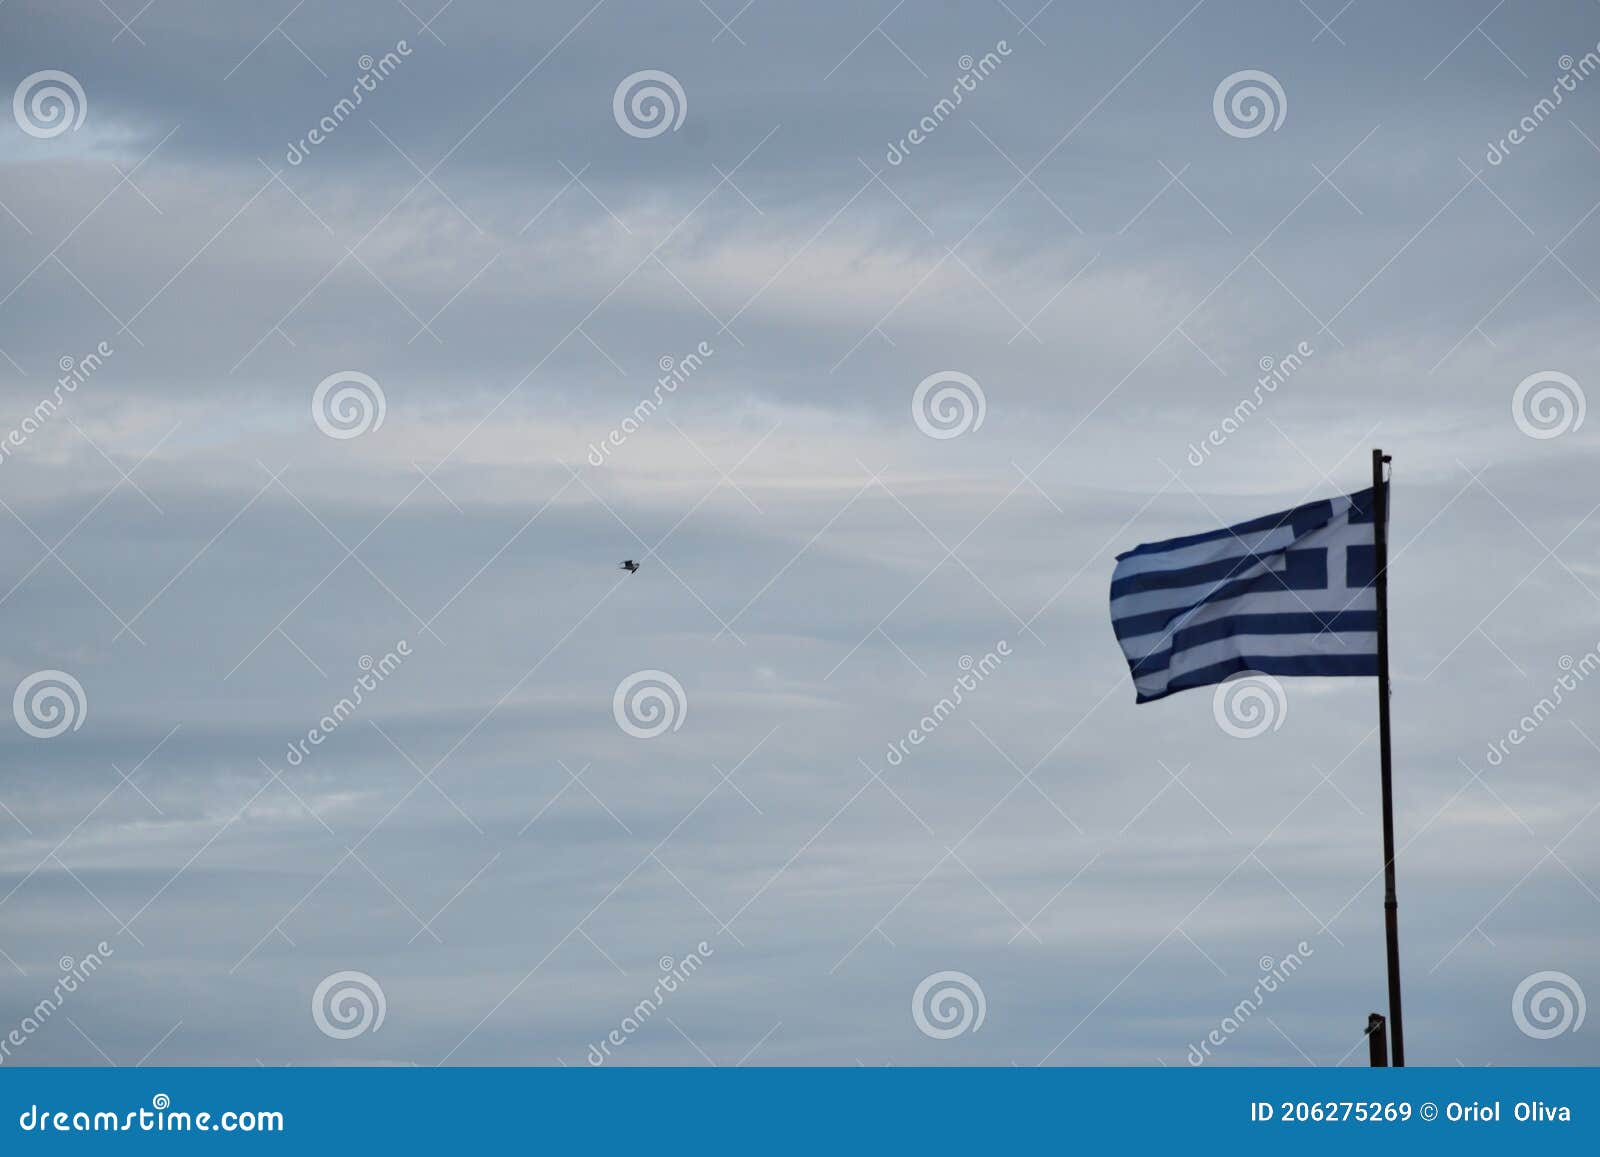 view of the main monuments of greece. old town of lepanto place of the battle where miguel de cervantes participated. greek flag